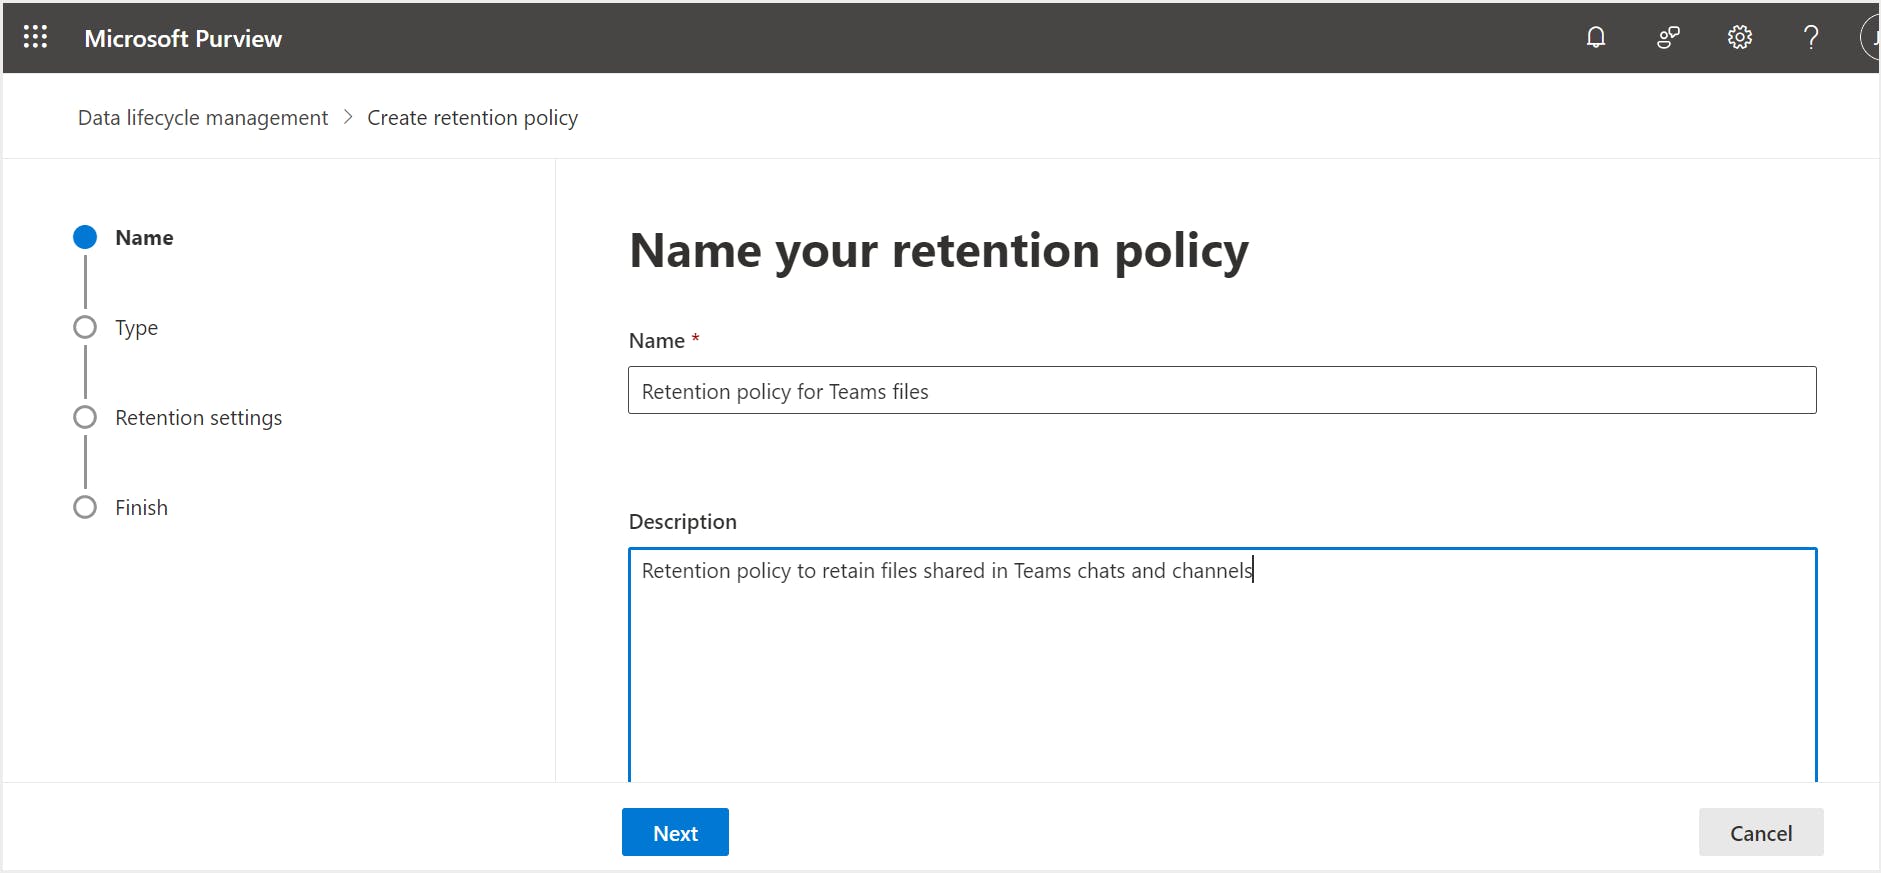 name your retention policy